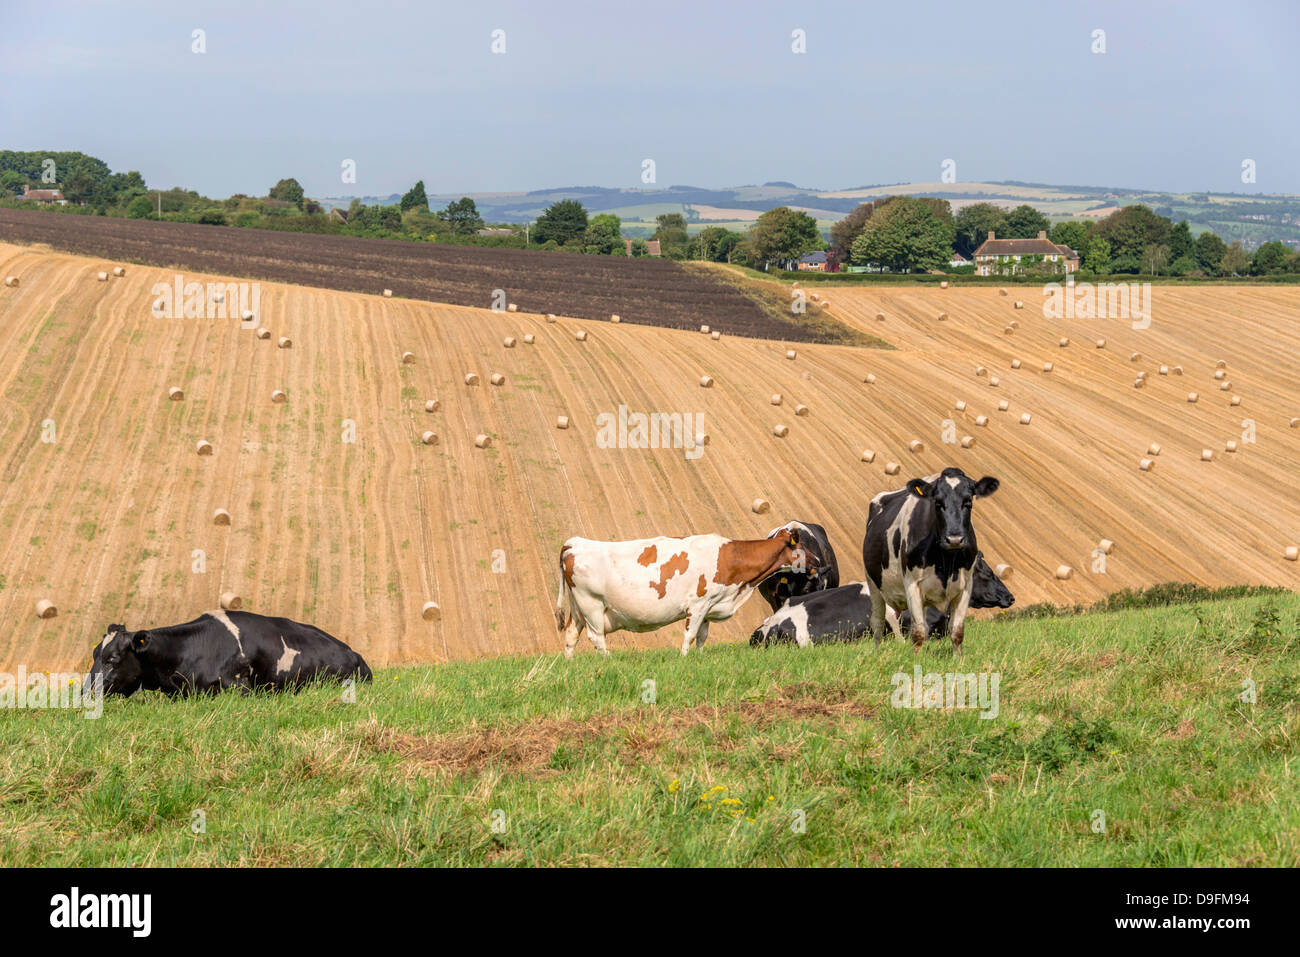 Cattle in field with farmland beyond, UK Stock Photo